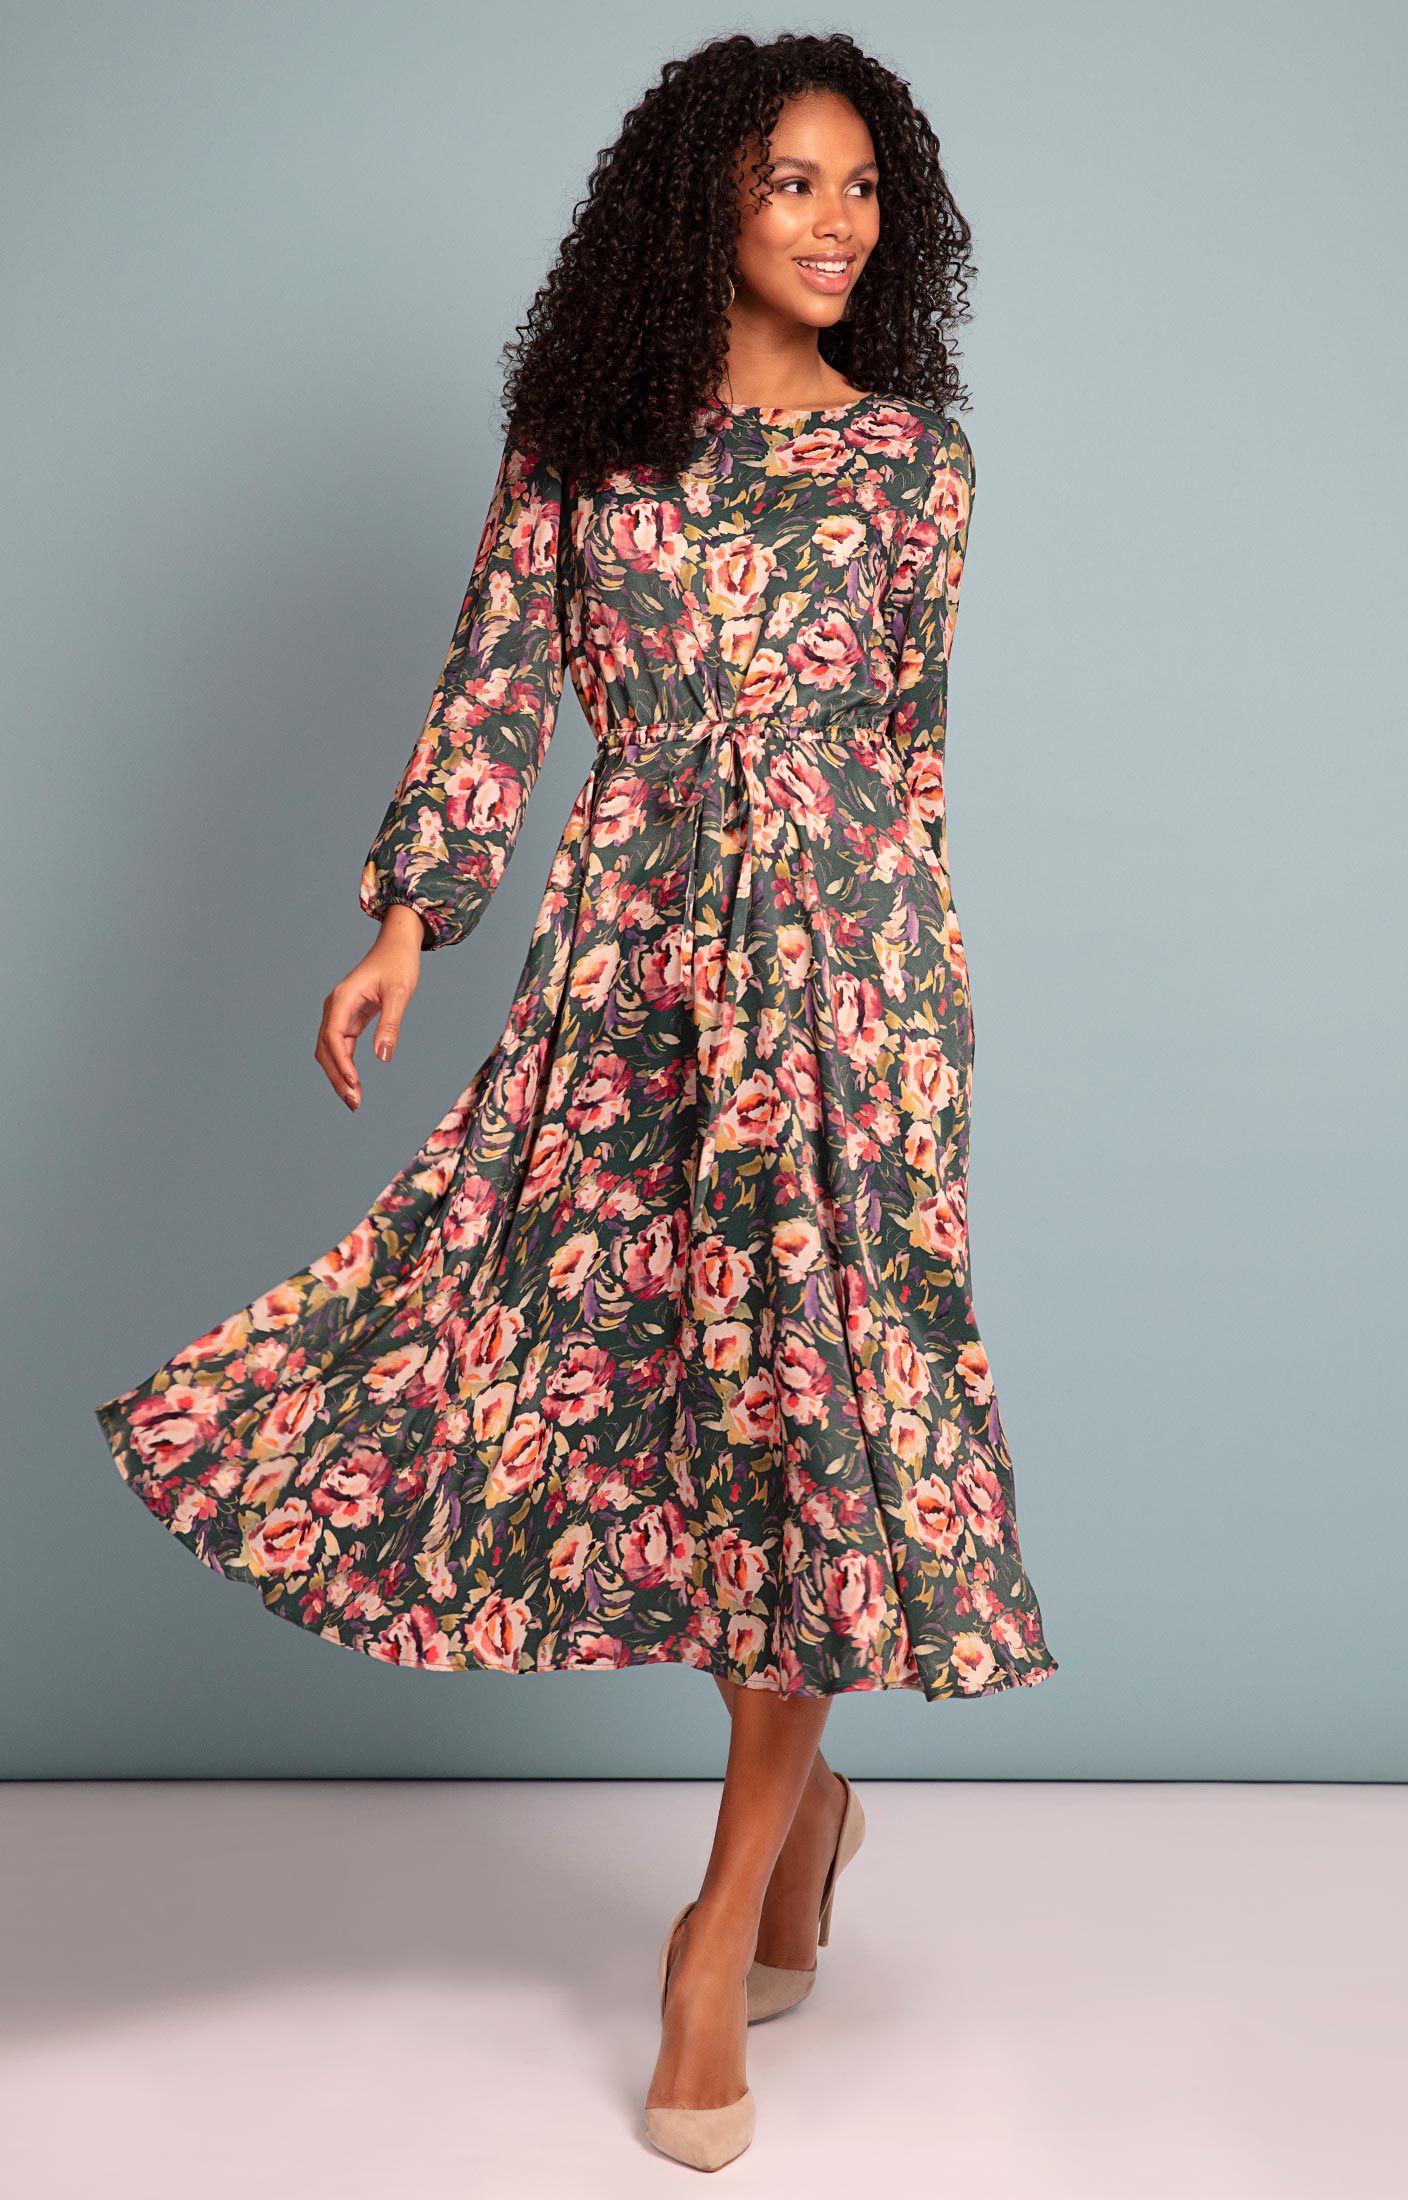 What are Floral Dresses?. Floral dresses are a type of dress that